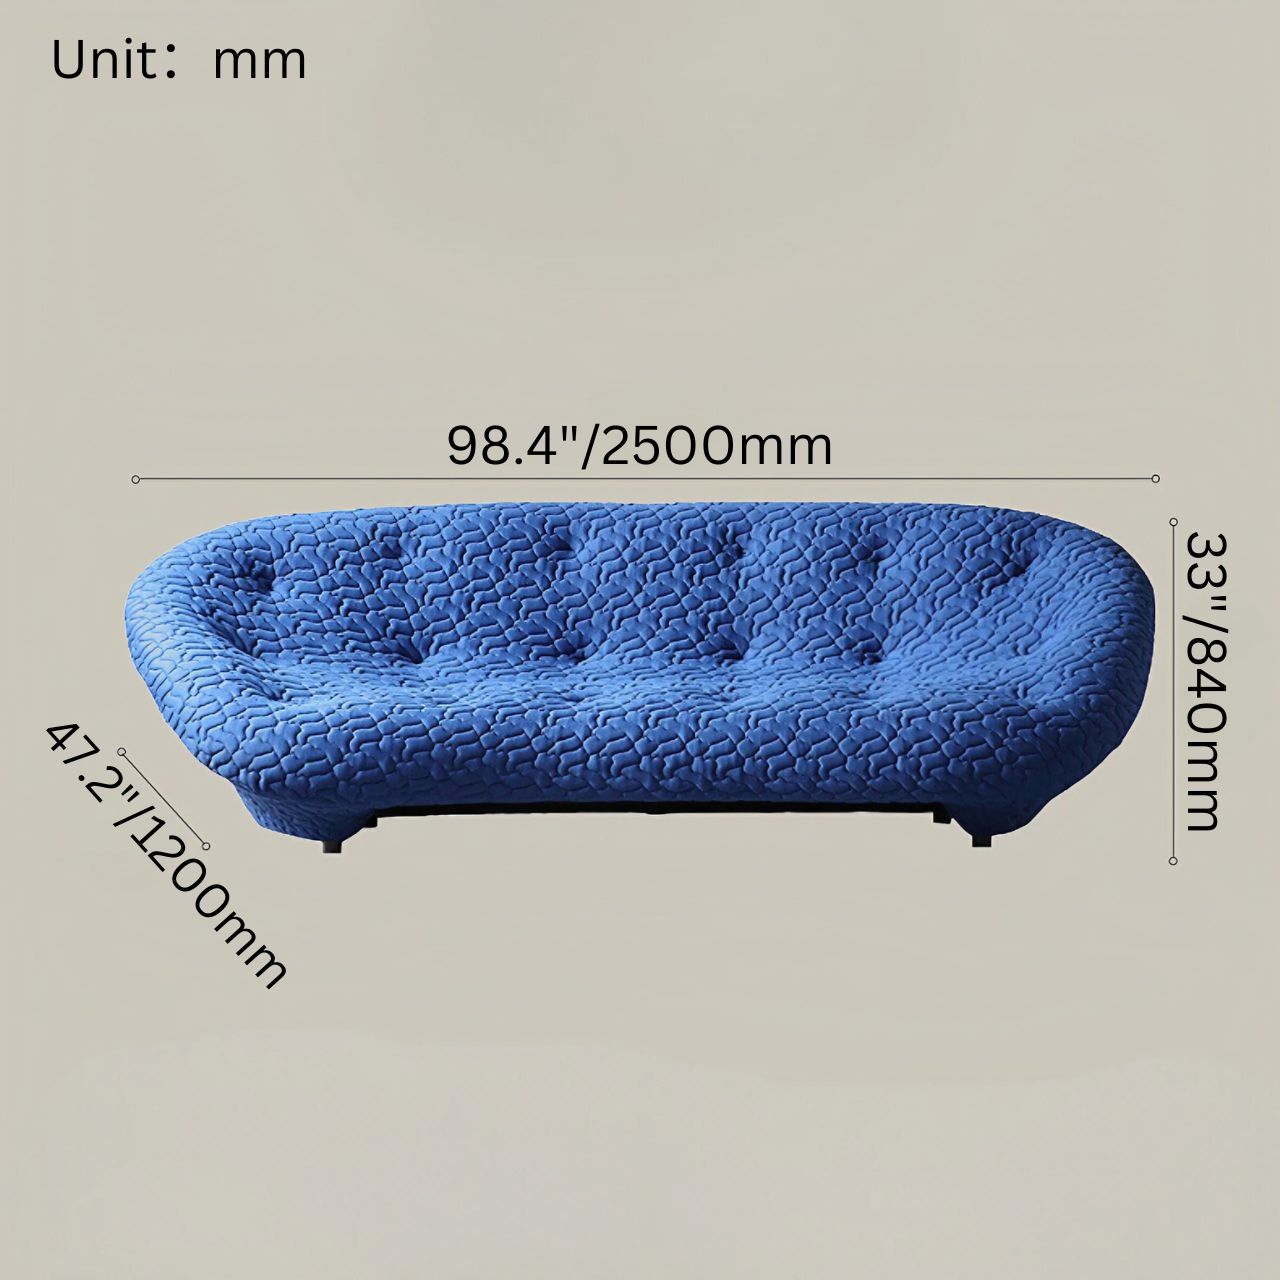 Elegant Blue 5D Spacer Fabric Minimalist Shell Sofa, Multi-Seater Curved Couch with Soft Cushion